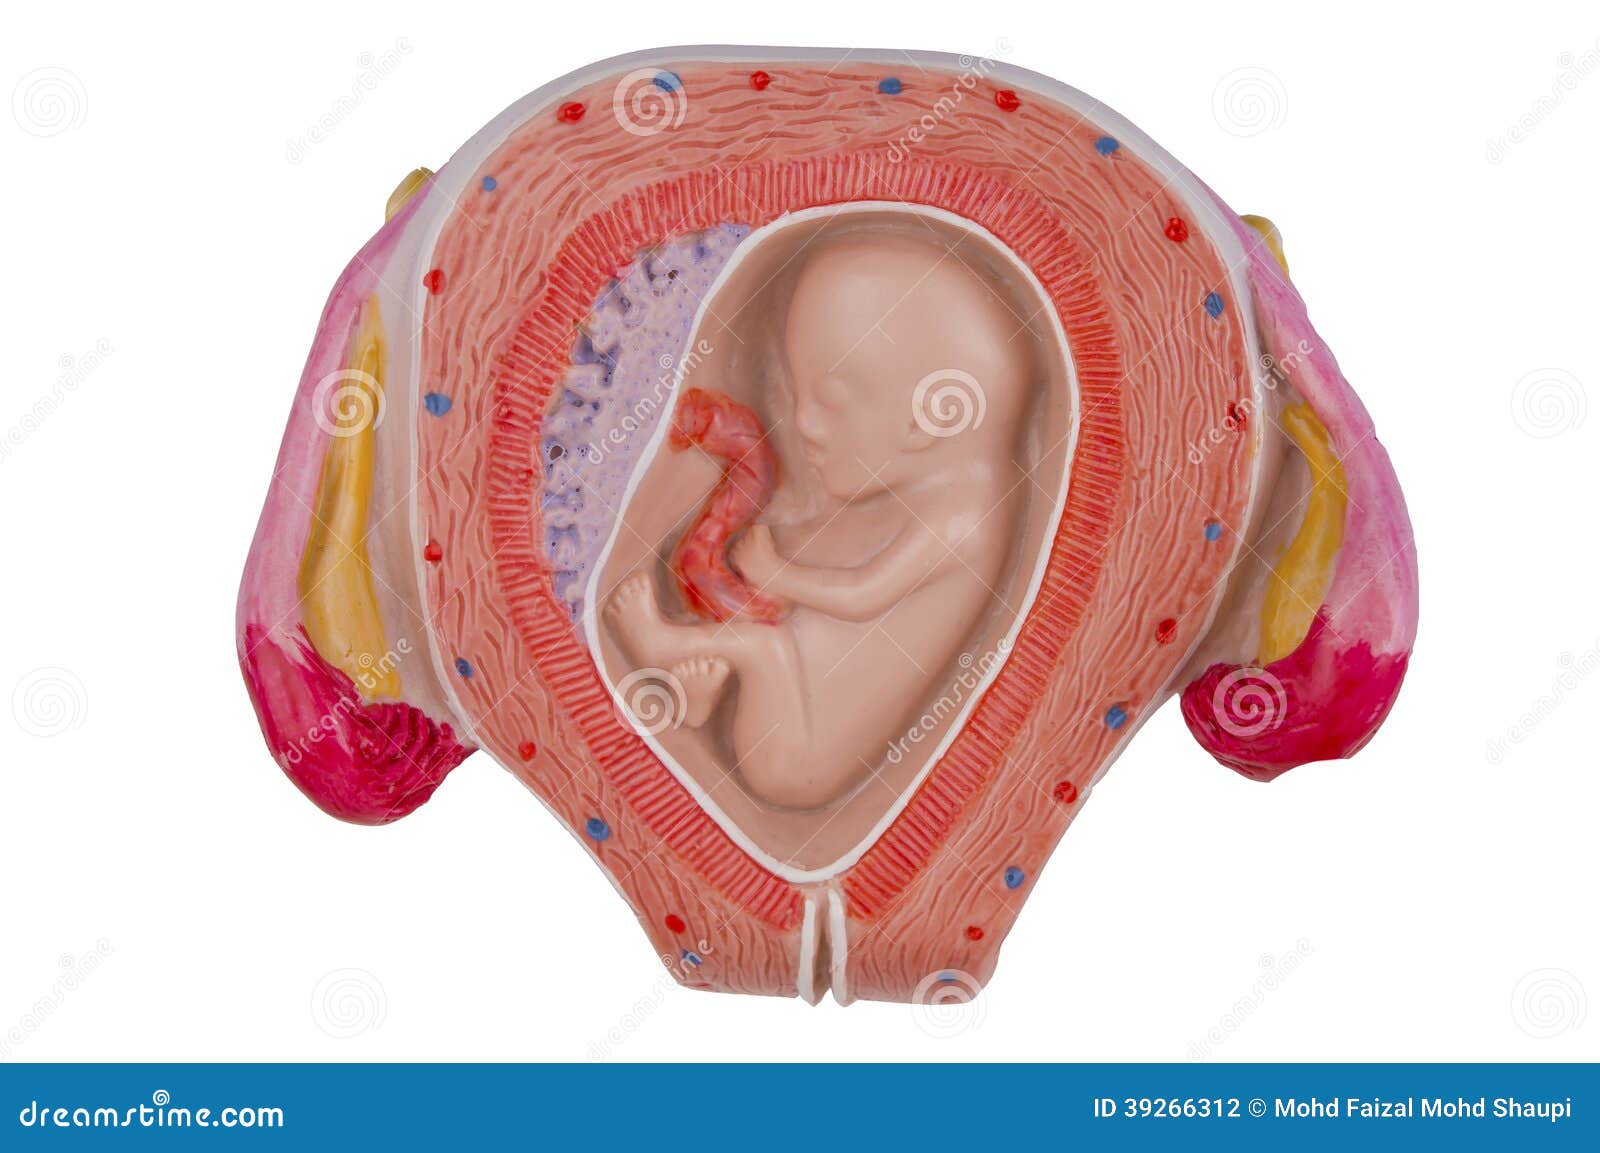 Pictures Of Two Month Old Baby In The Womb 26